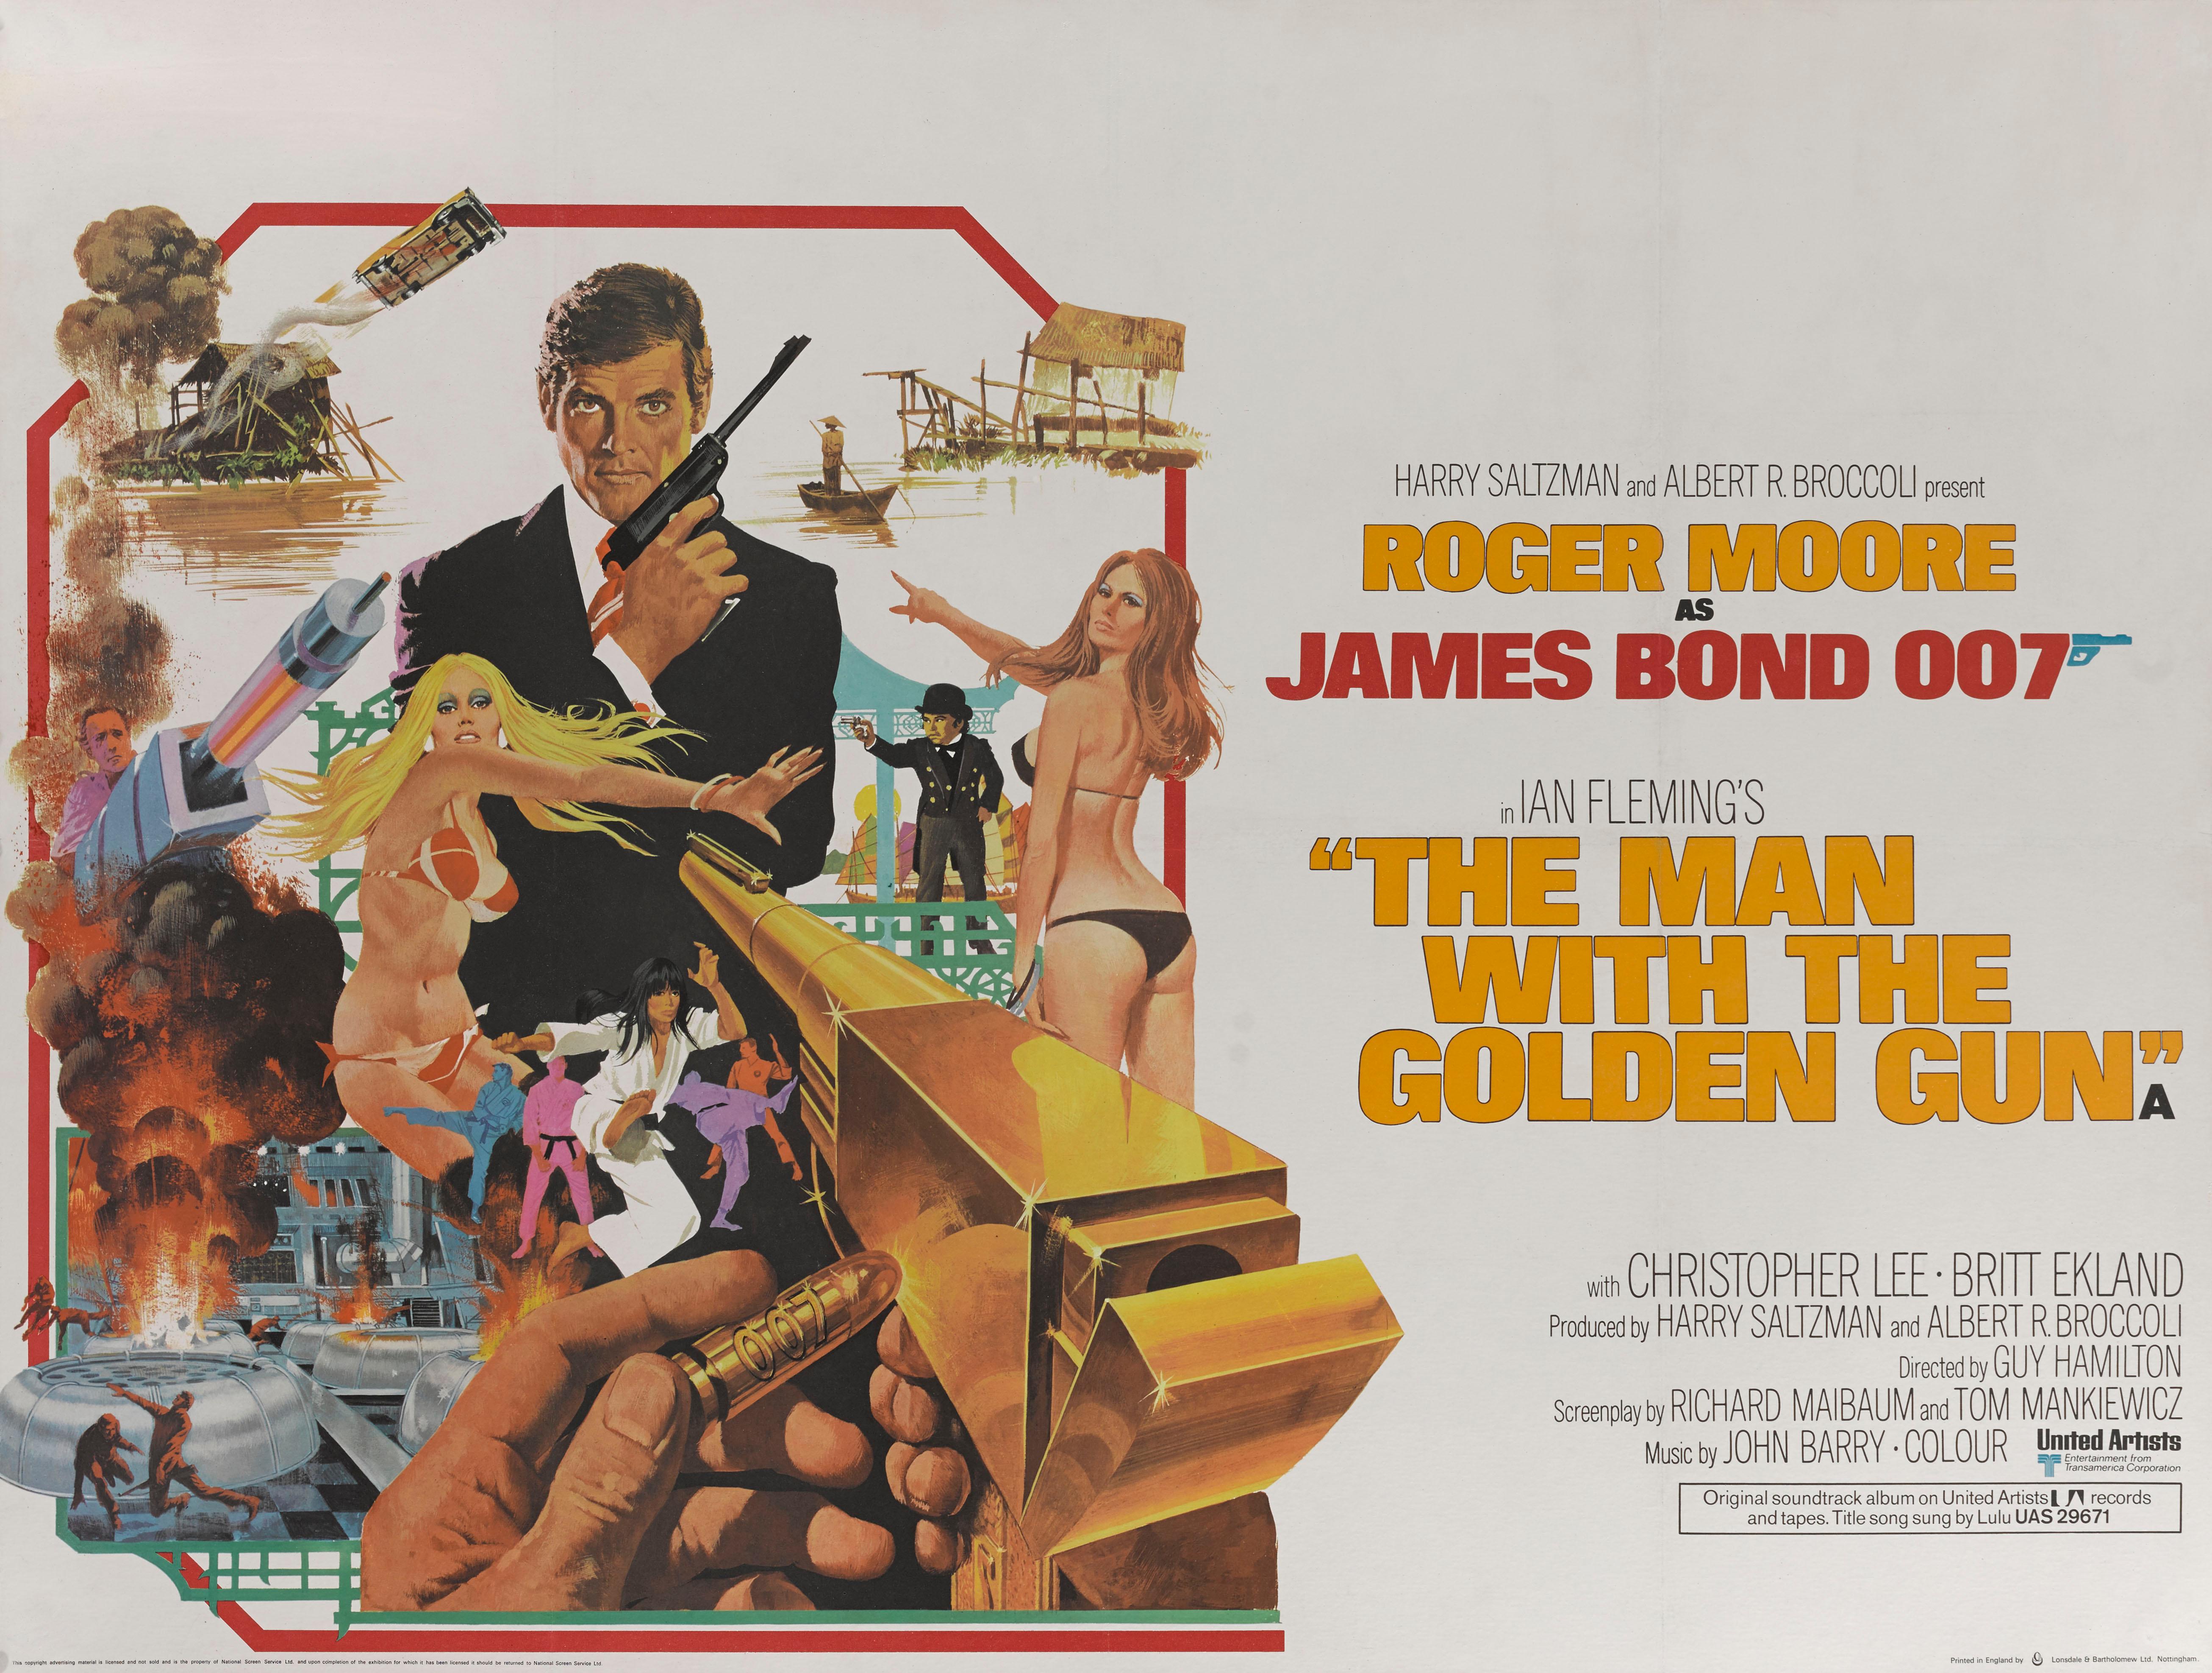 Original British film poster for the 1974 The Man with the Golden Gun.
This is the second time that Roger Moore played James Bond, and the fourth and final time that Guy Hamilton would direct a Bond film. Christopher Lee plays the villain Francisco